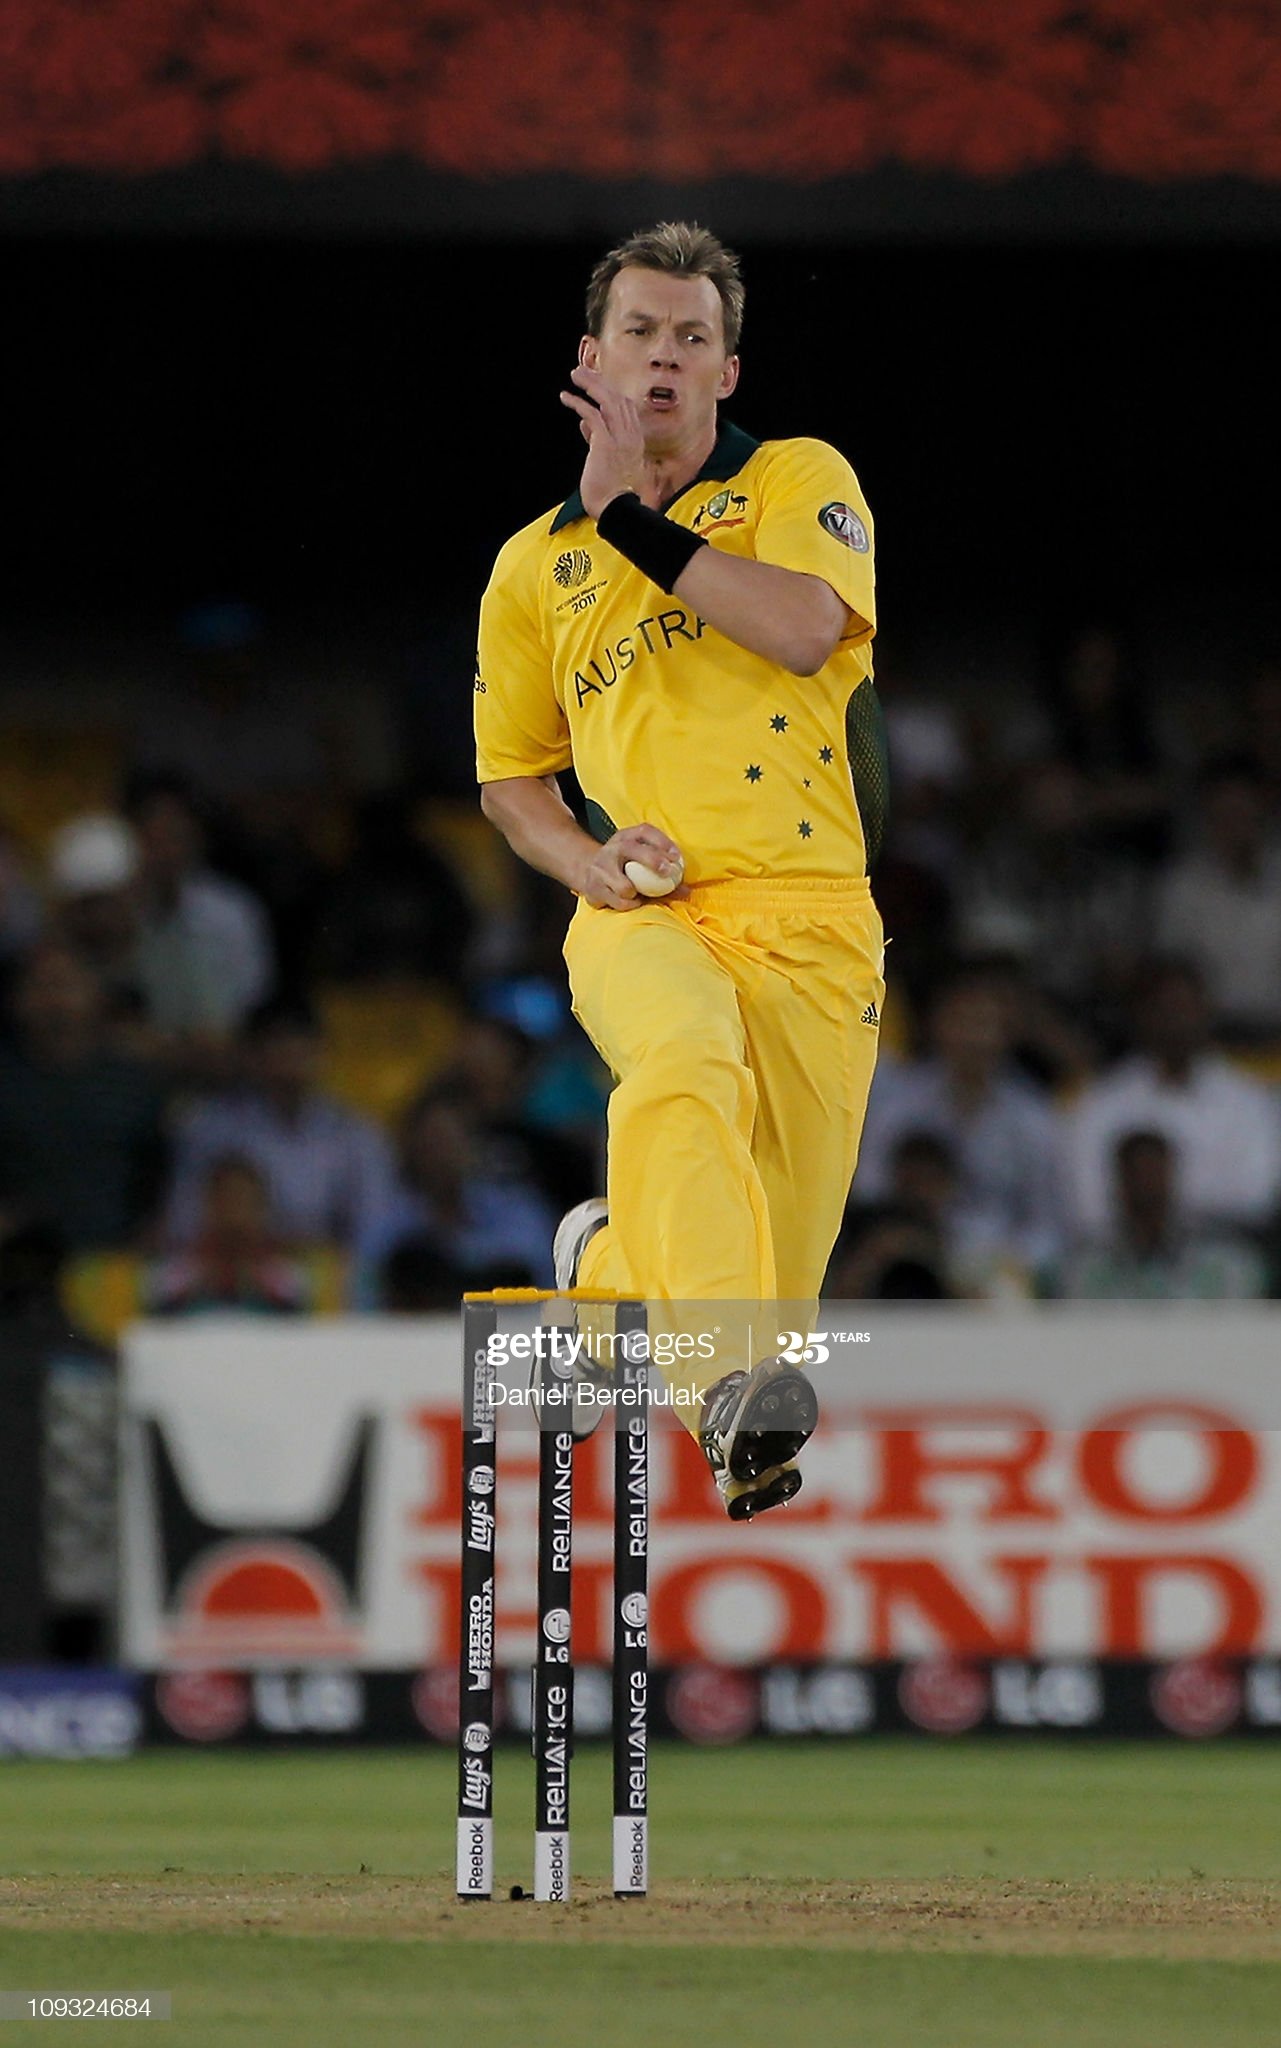 A big happy birthday to one of our finest ever fast bowlers, Brett Lee! 